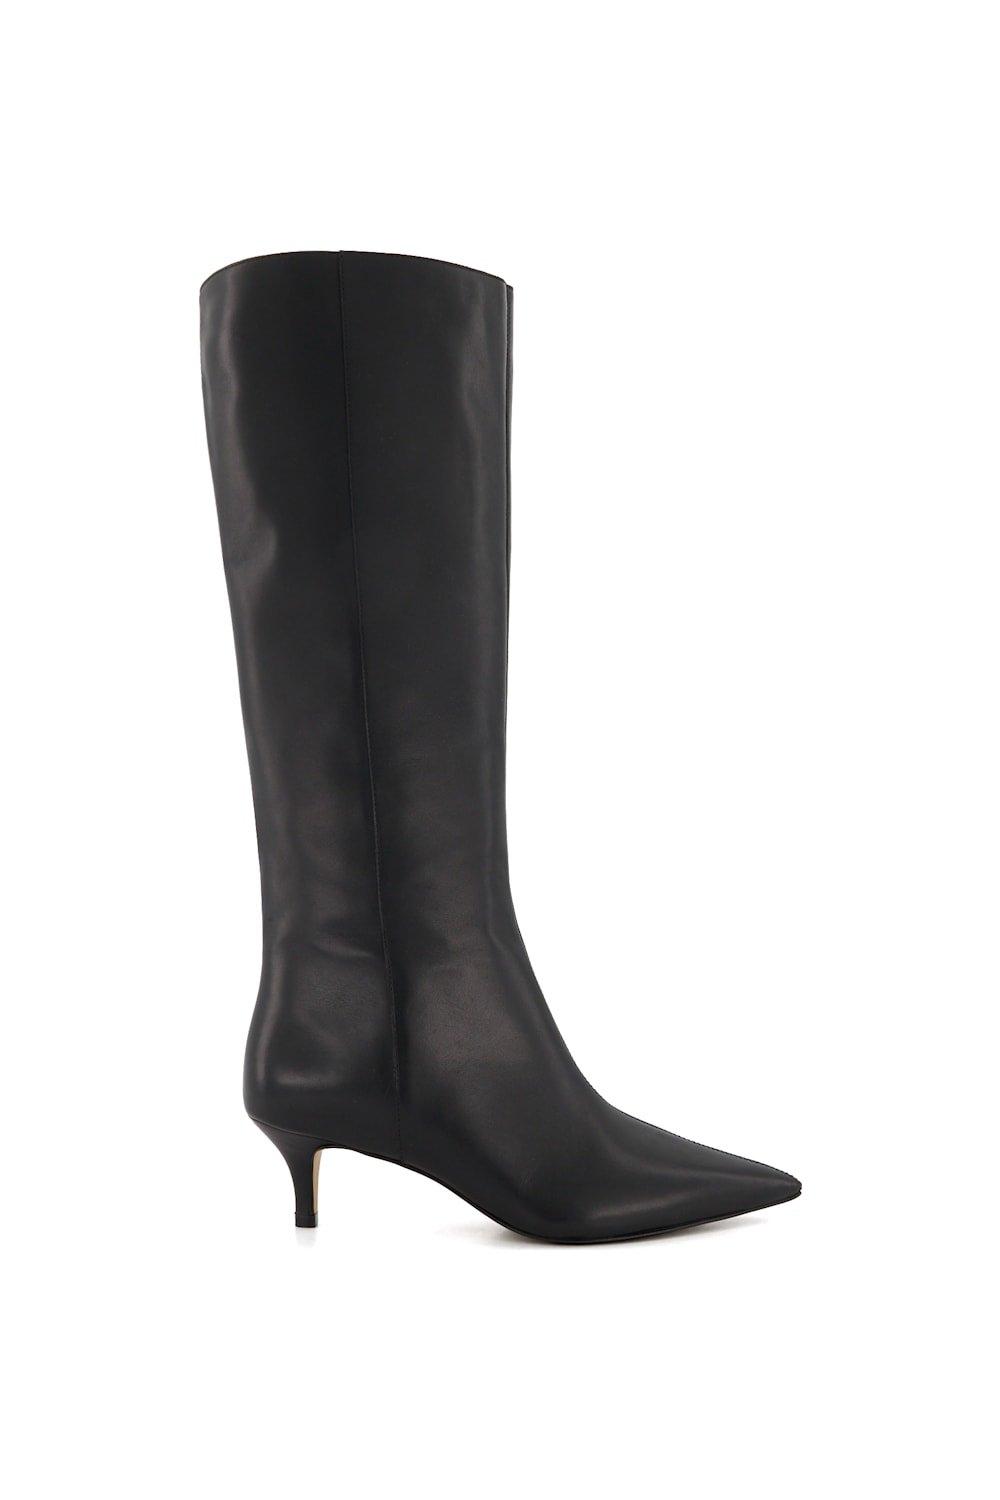 Boots | 'Smooth' Leather Knee High Boots | Dune London